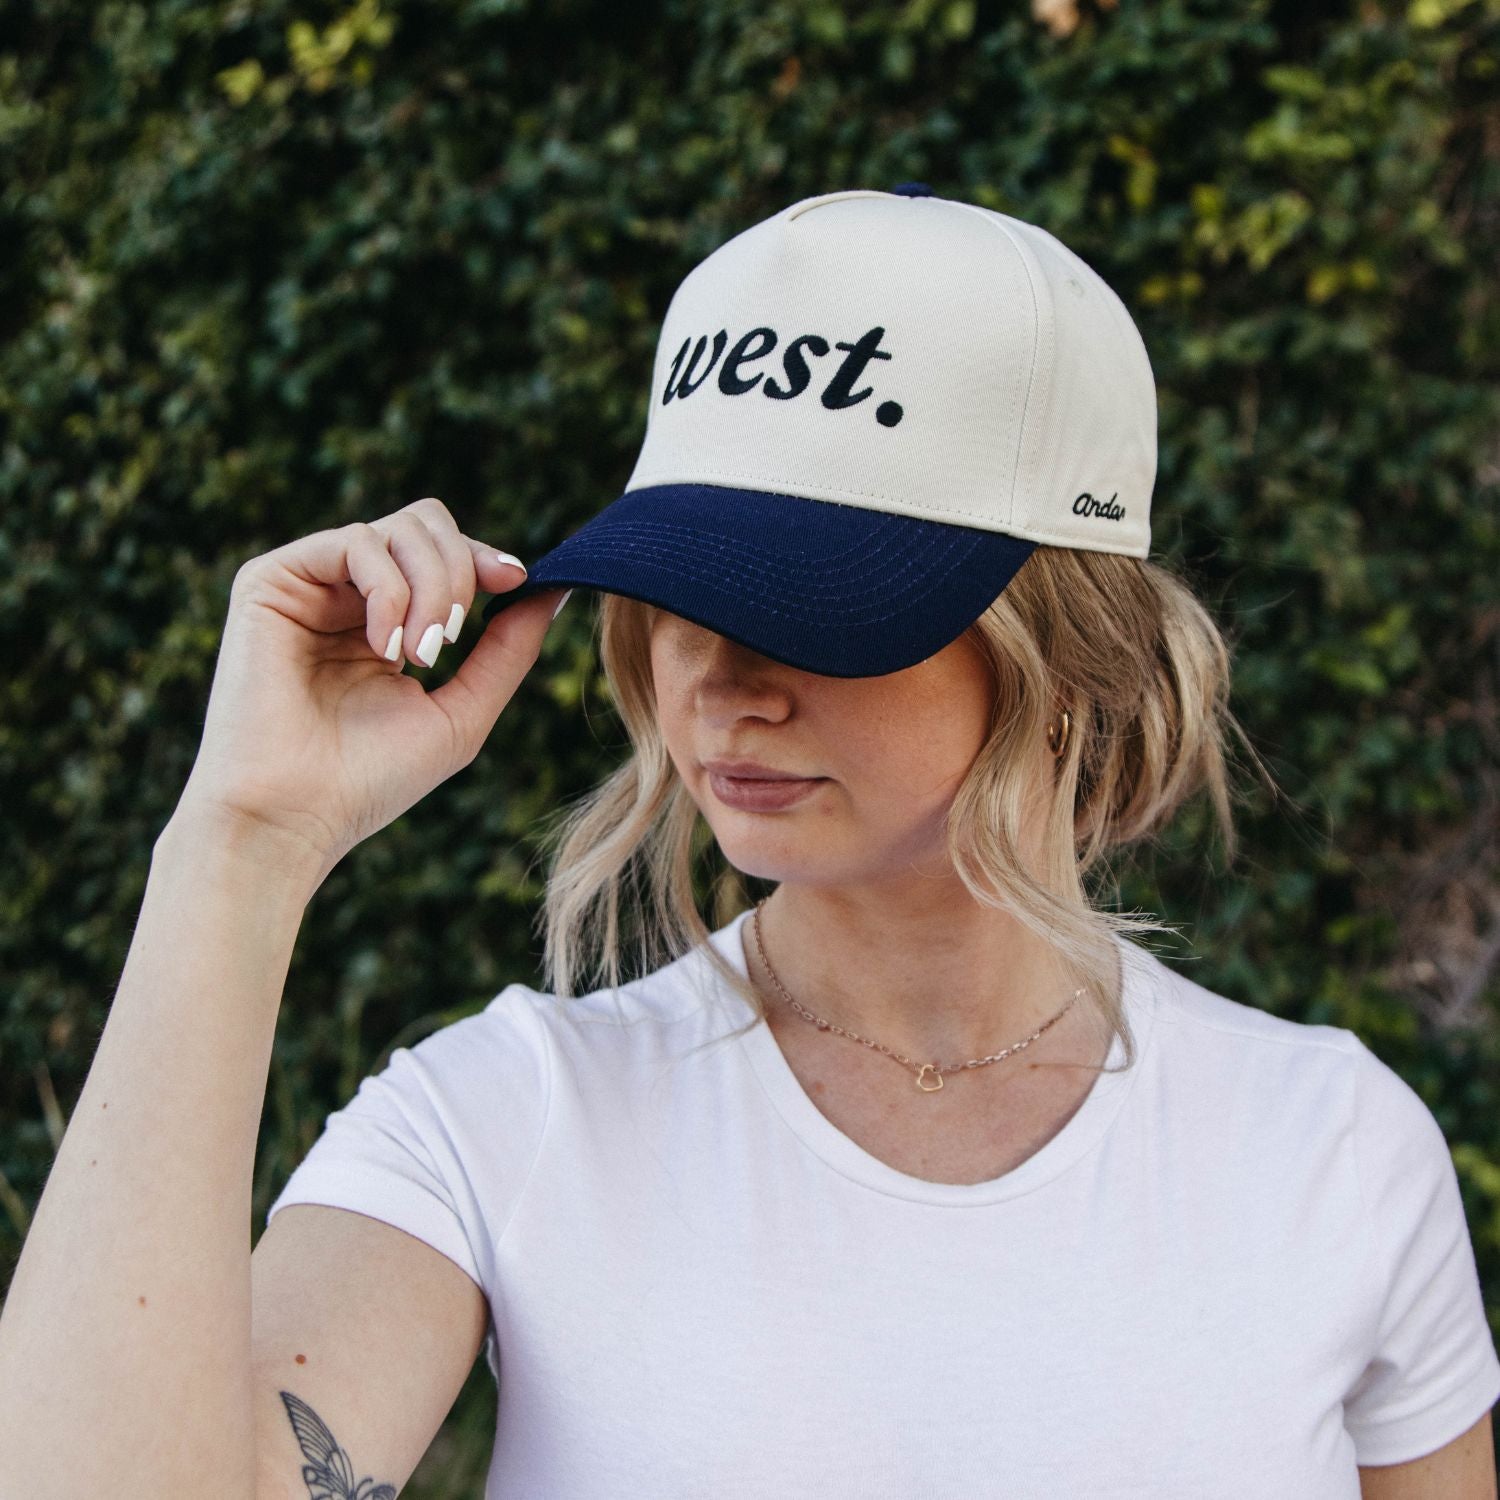 The West Hat